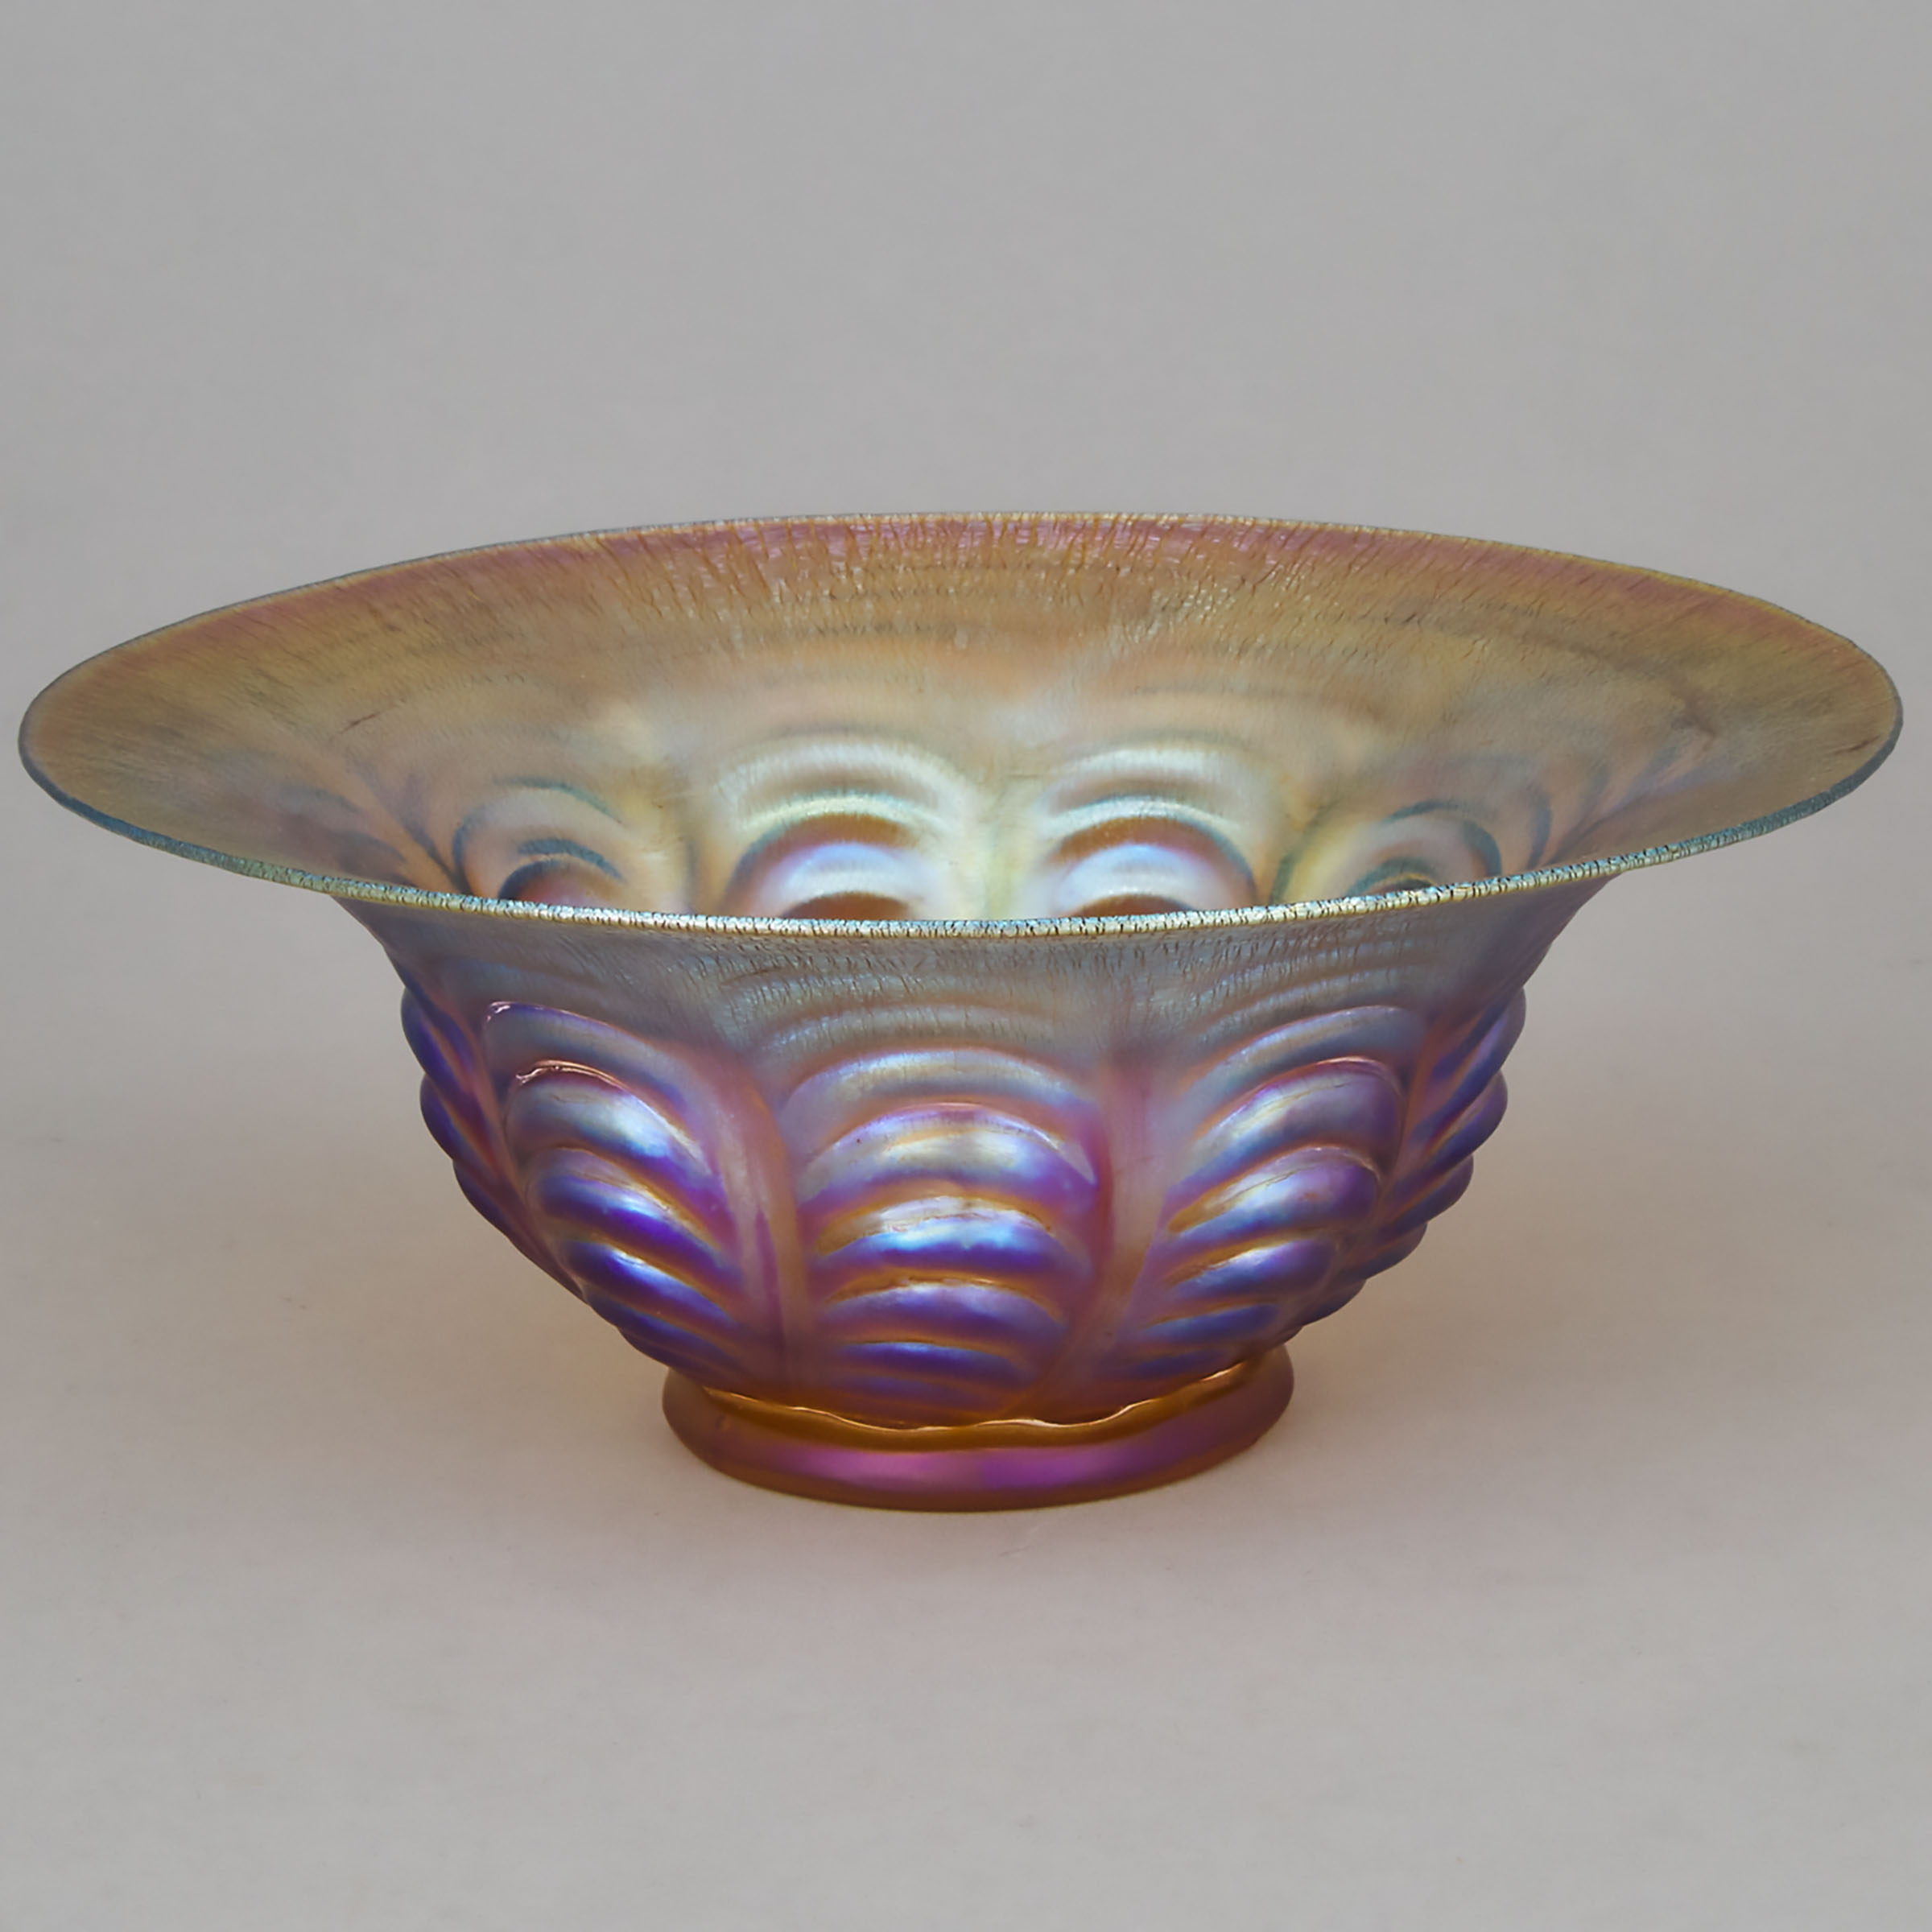 American Iridescent Glass Bowl, early 20th century